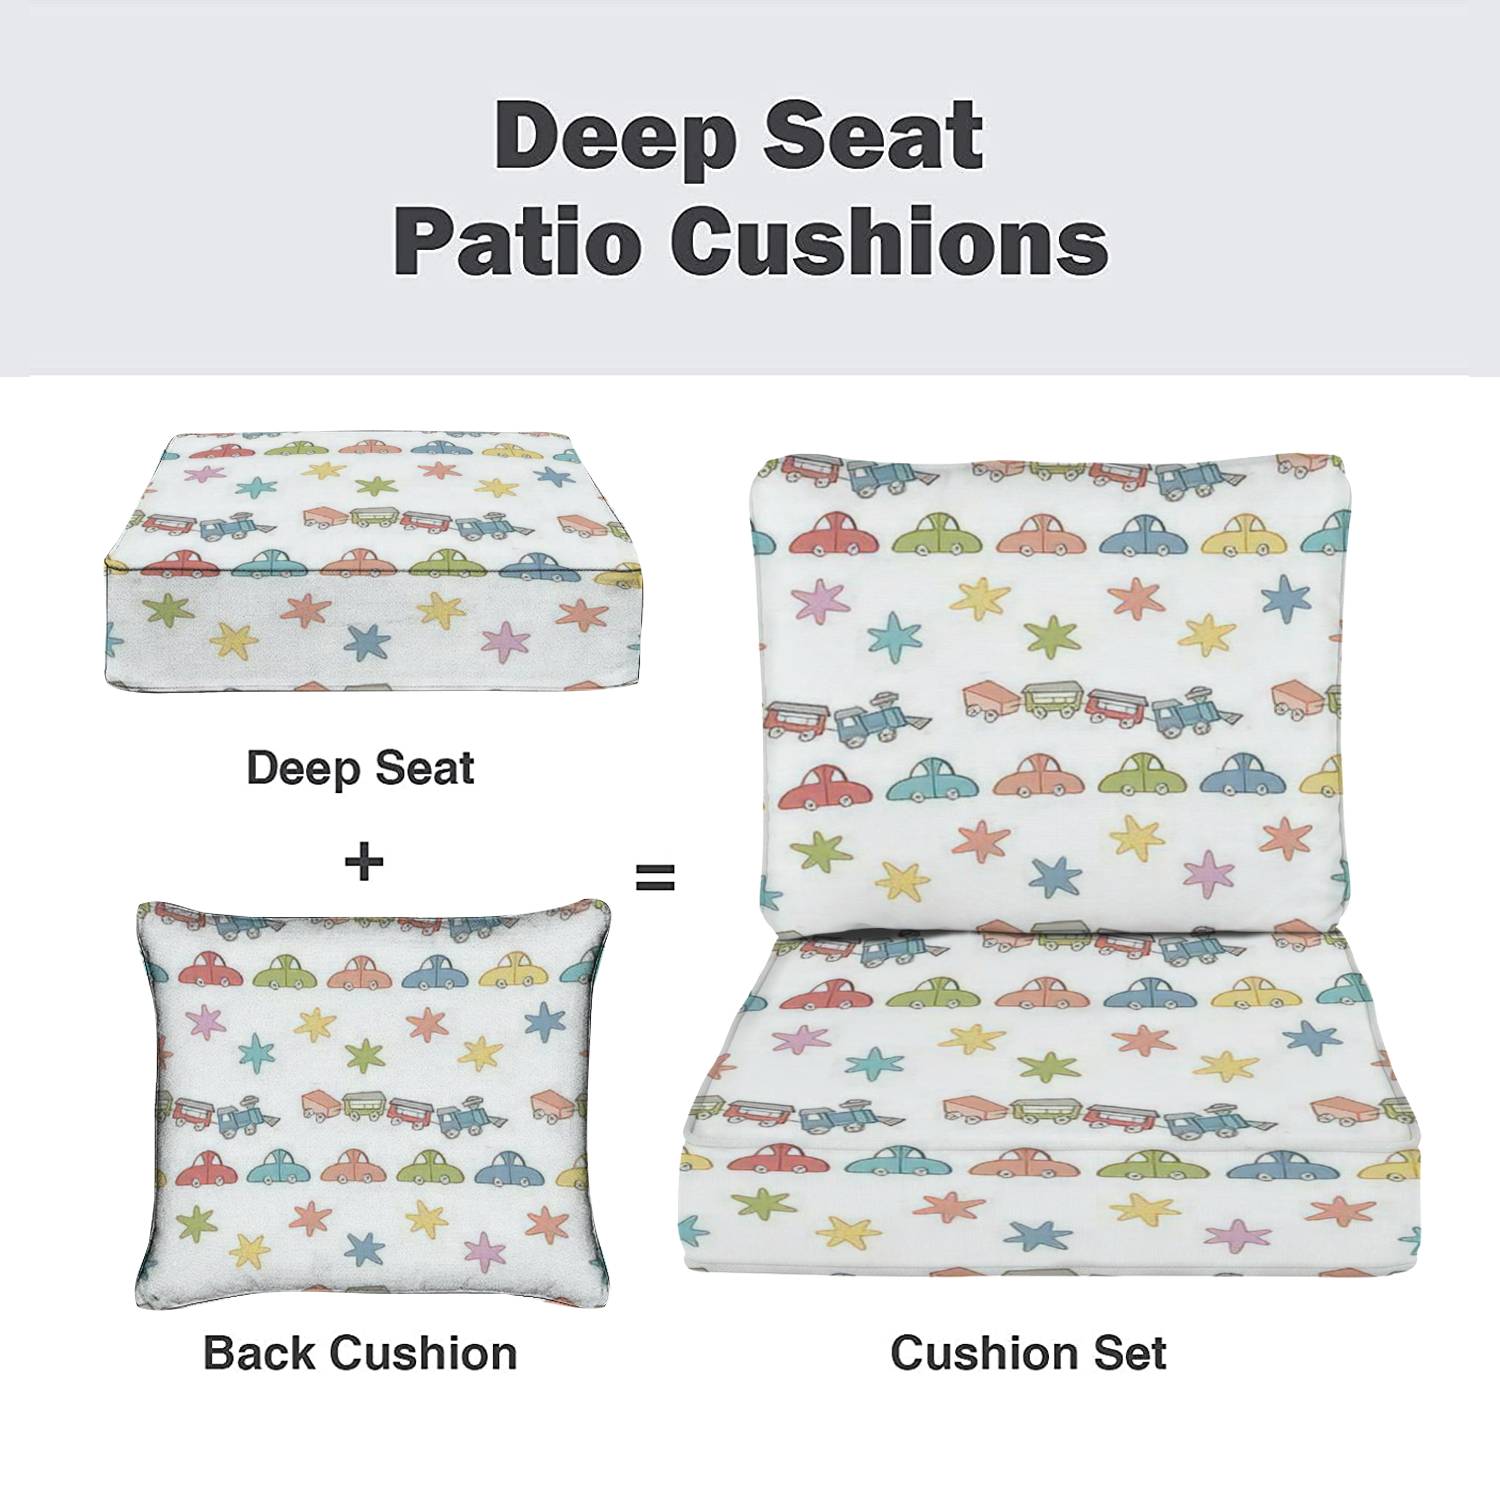 2-Piece Deep Seating Cushion Set Toy train cars Stars Seamless Doodle cartoon print White Outdoor Chair Solid Rectangle Patio Cushion Set - image 2 of 5